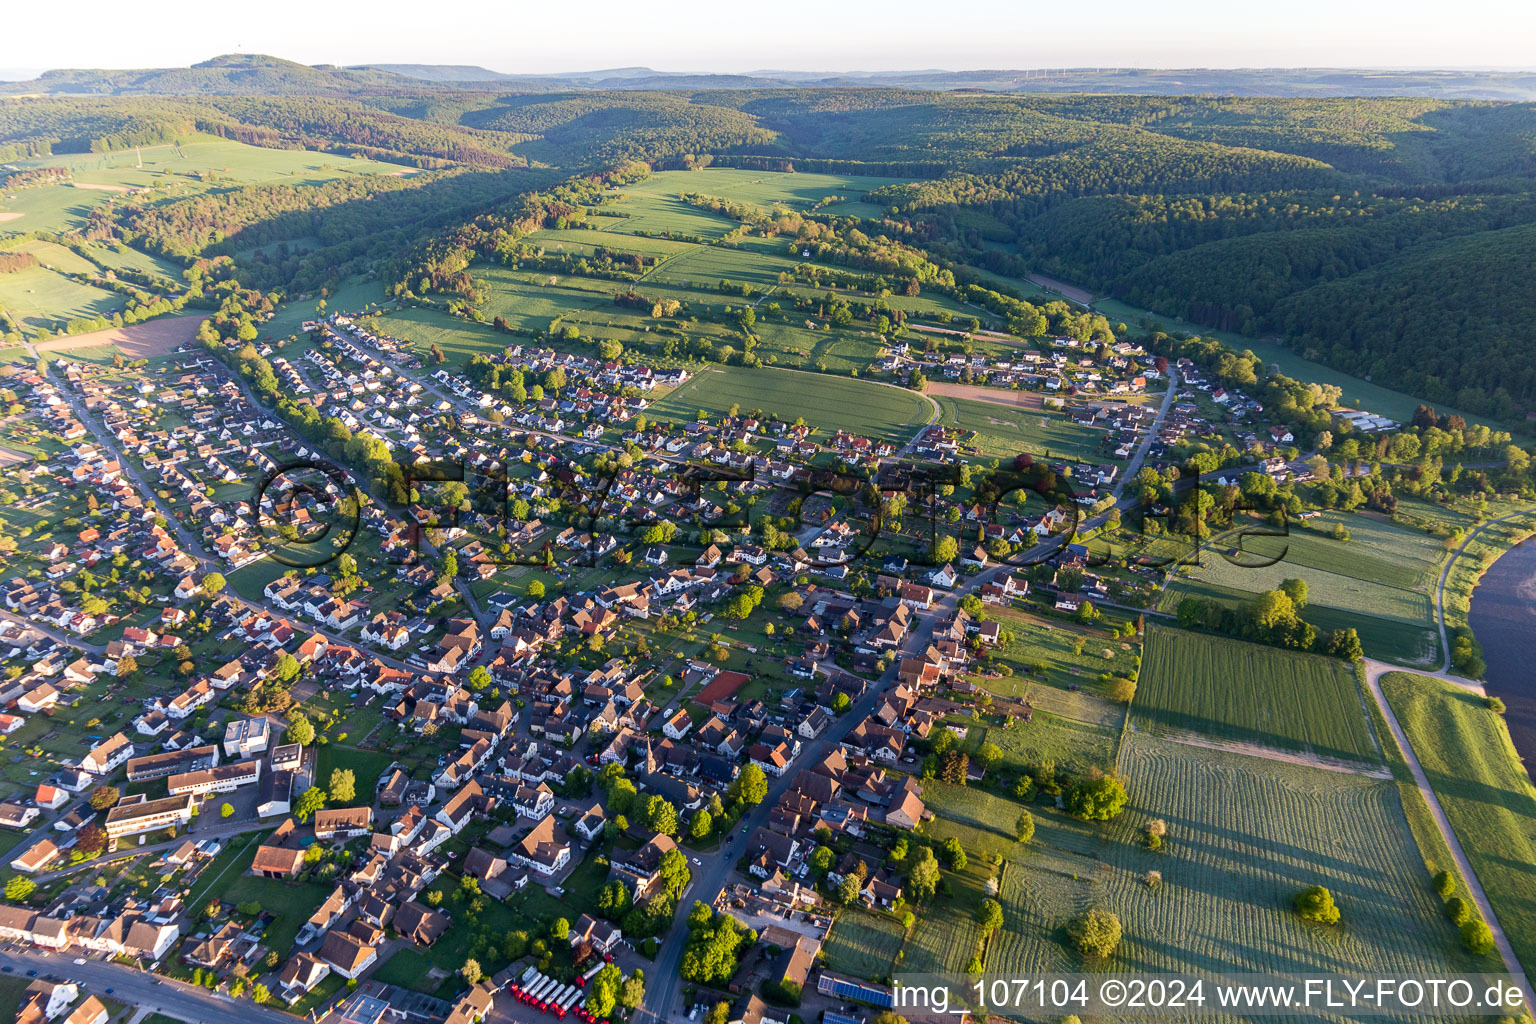 Location view of the streets and houses of residential areas in the valley landscape surrounded by mountains in Stahle in the state North Rhine-Westphalia, Germany